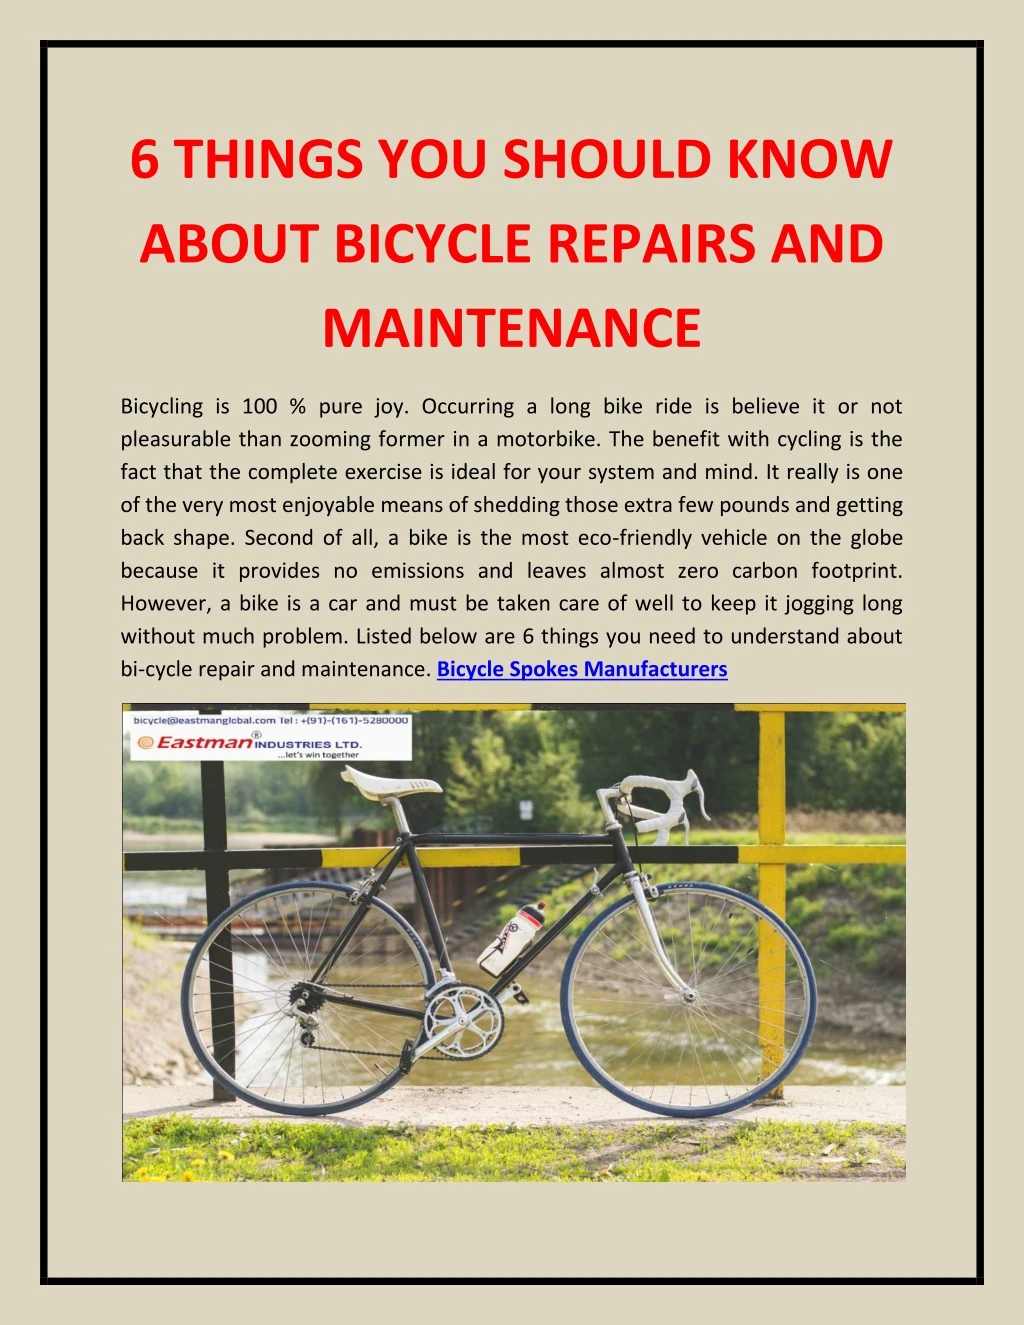 6 things you should know about bicycle repairs